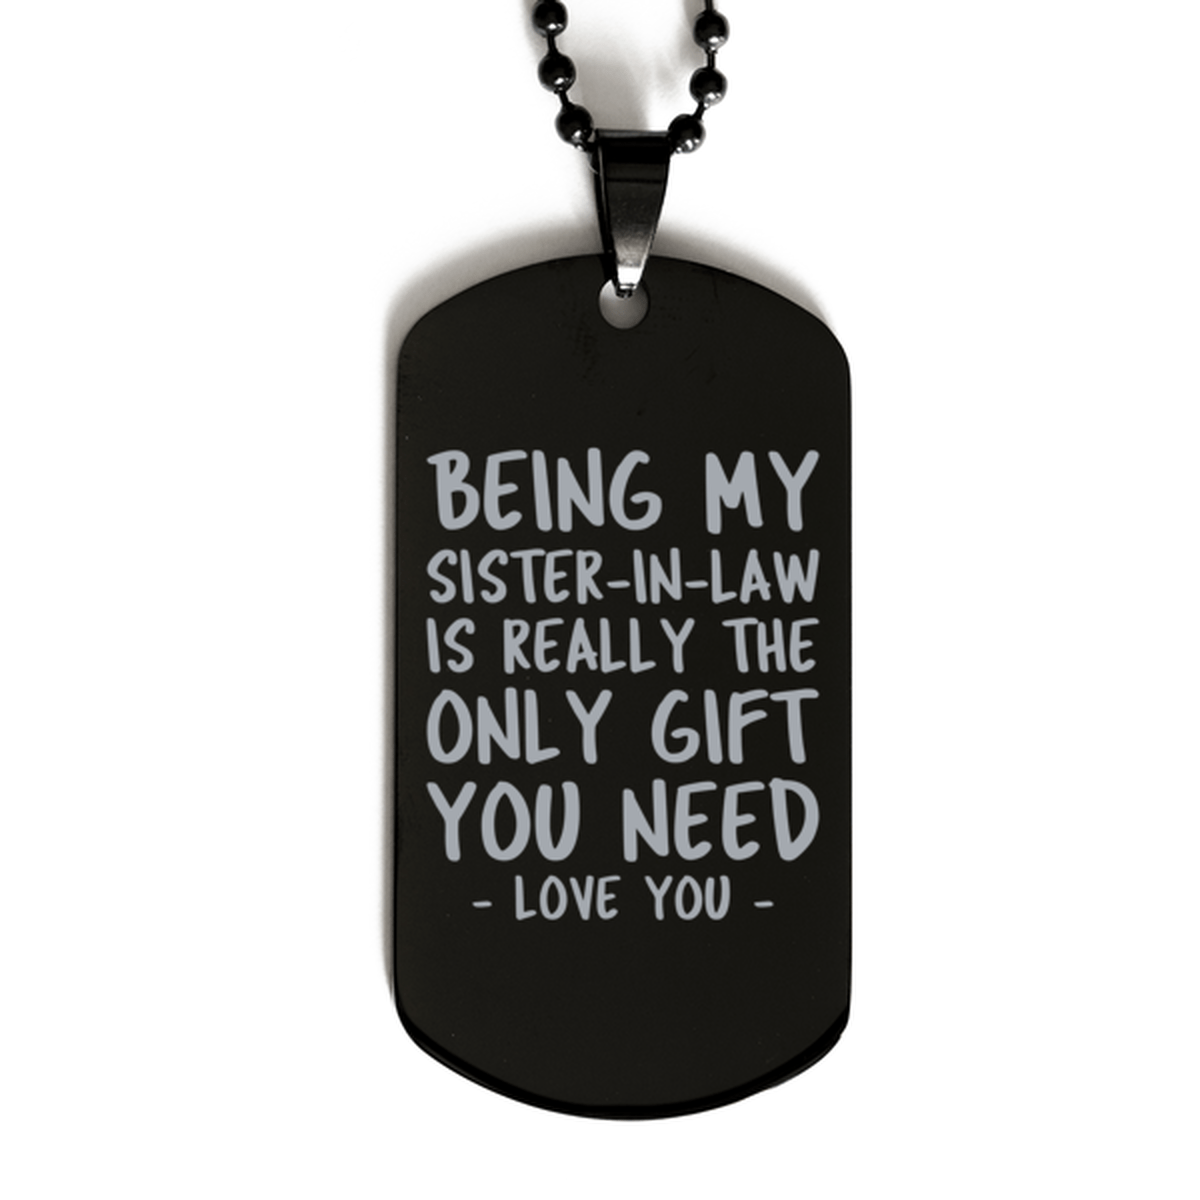 Funny Sister-in-law Black Dog Tag Necklace, Being My Sister-in-law Is Really the Only Gift You Need, Best Birthday Gifts for Sister-in-law